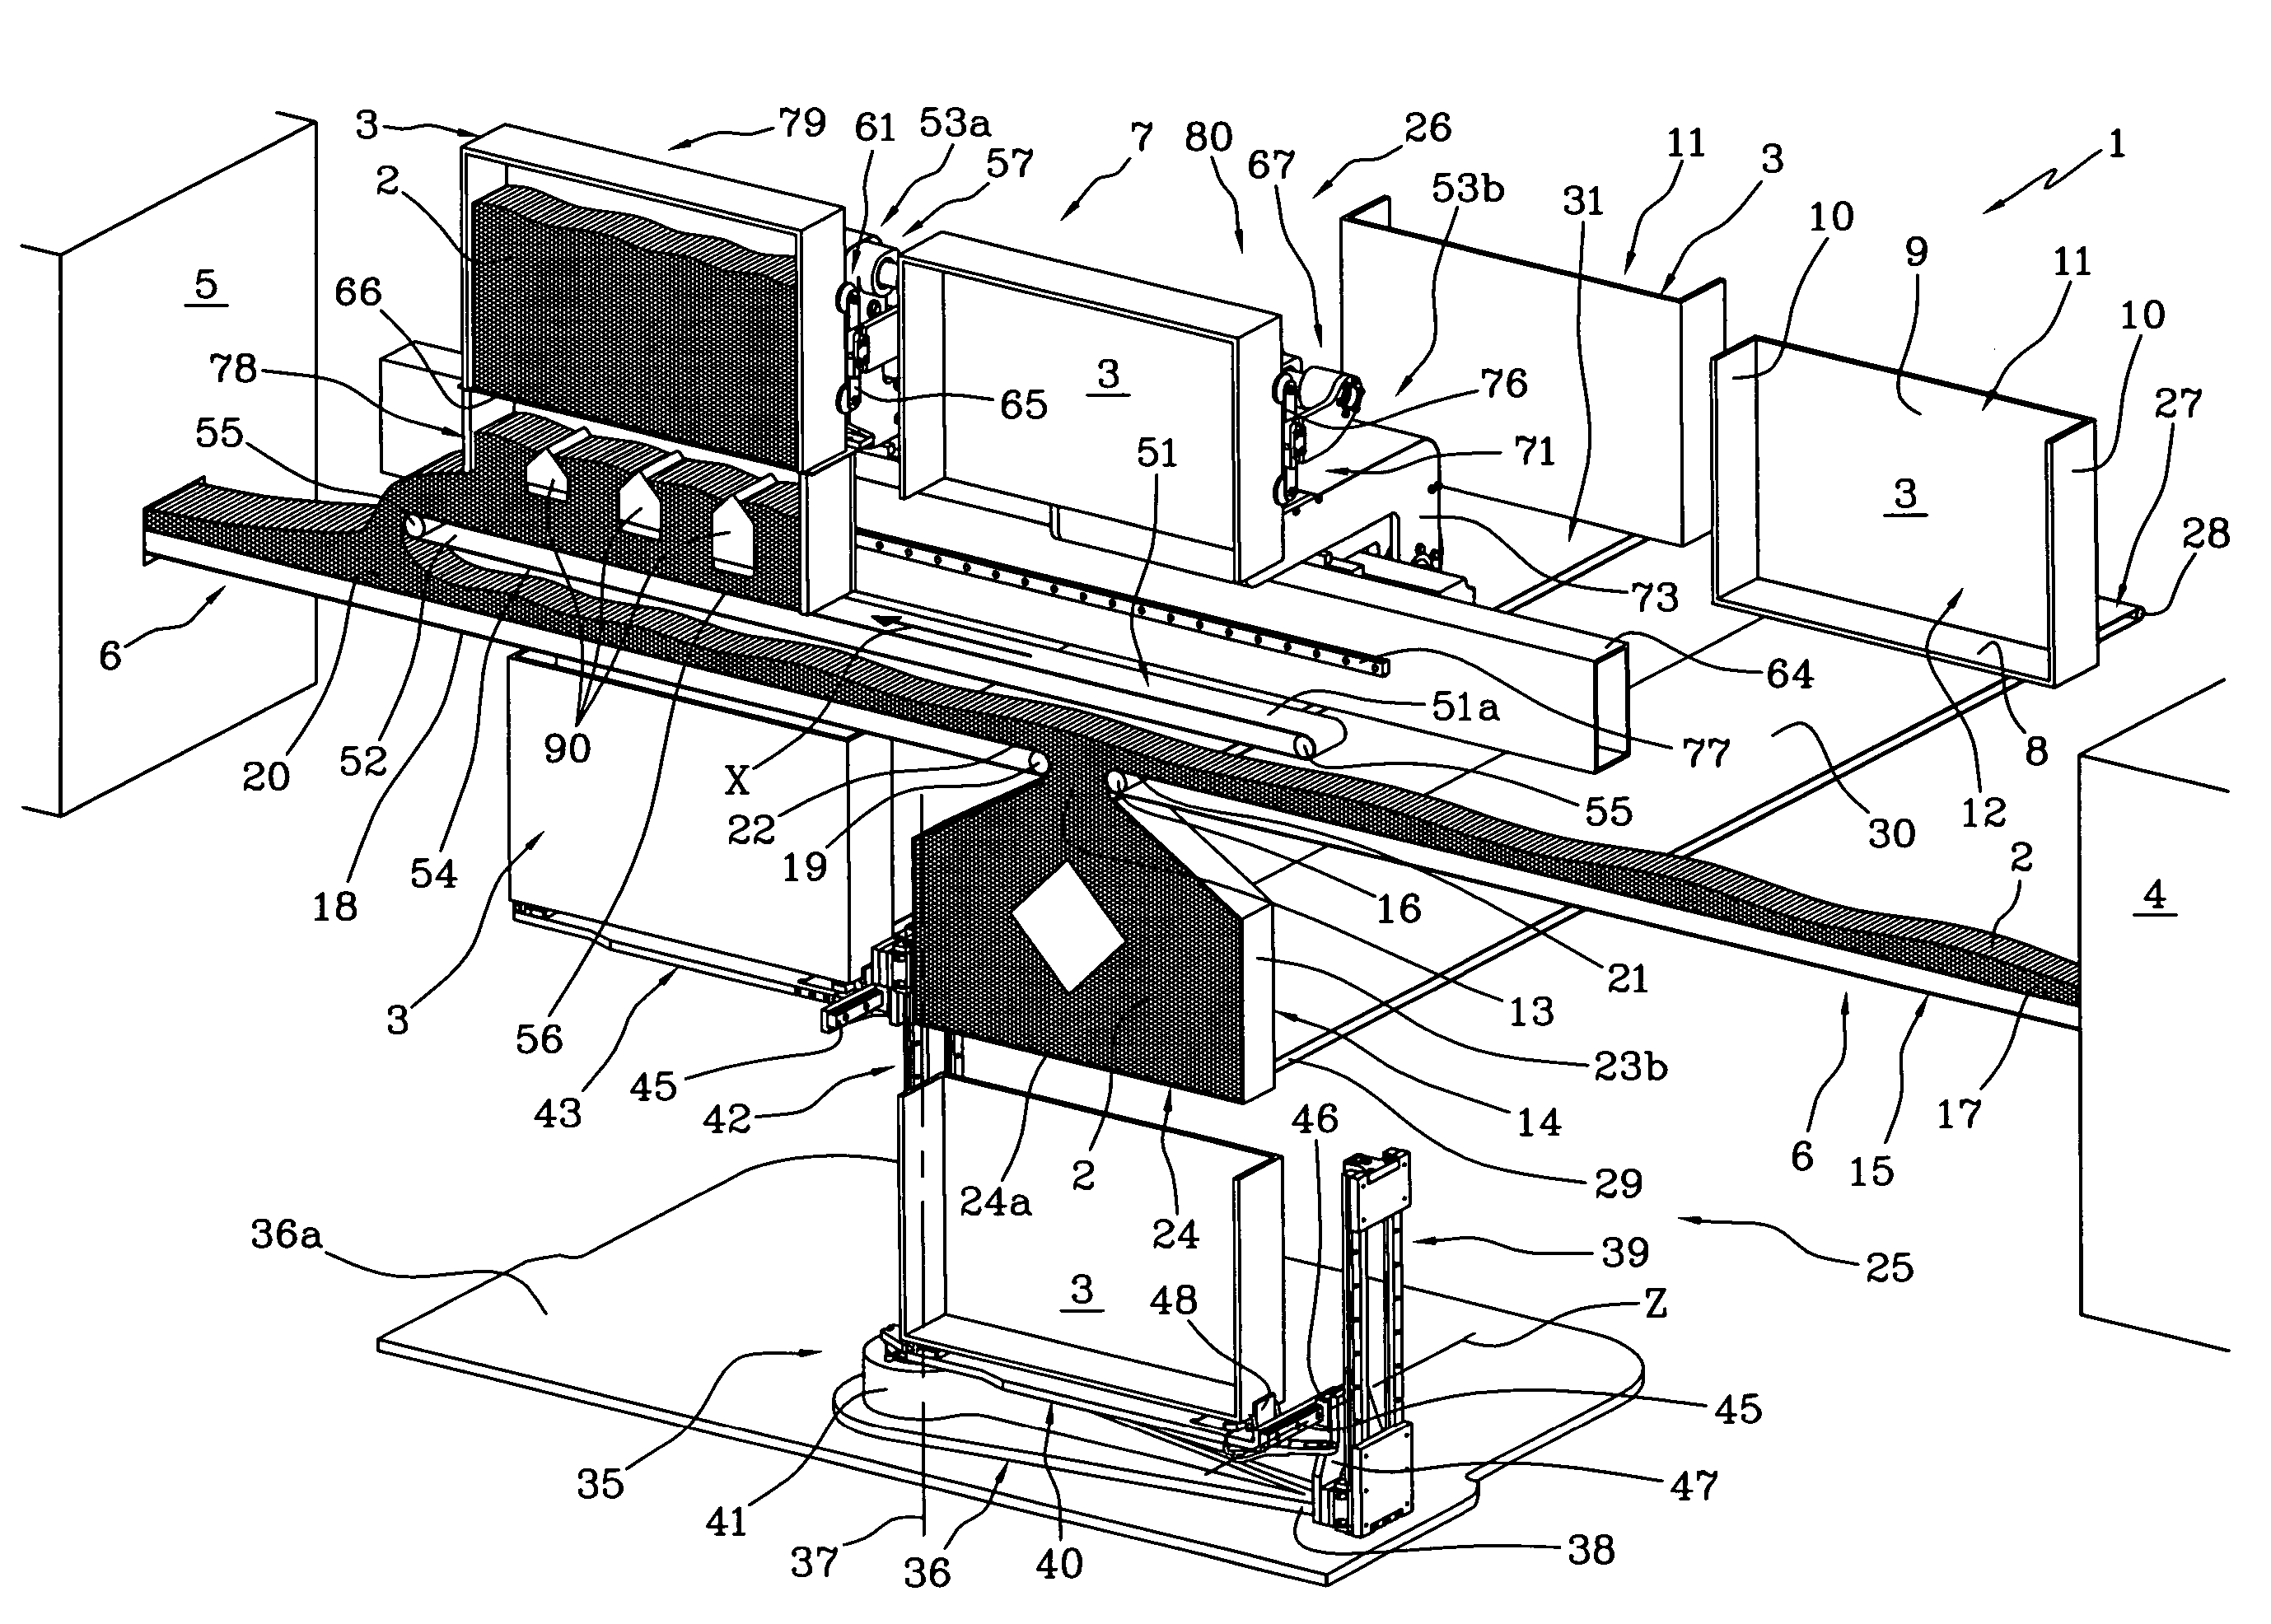 Method and equipment for batch handling and transfer of tobacco products